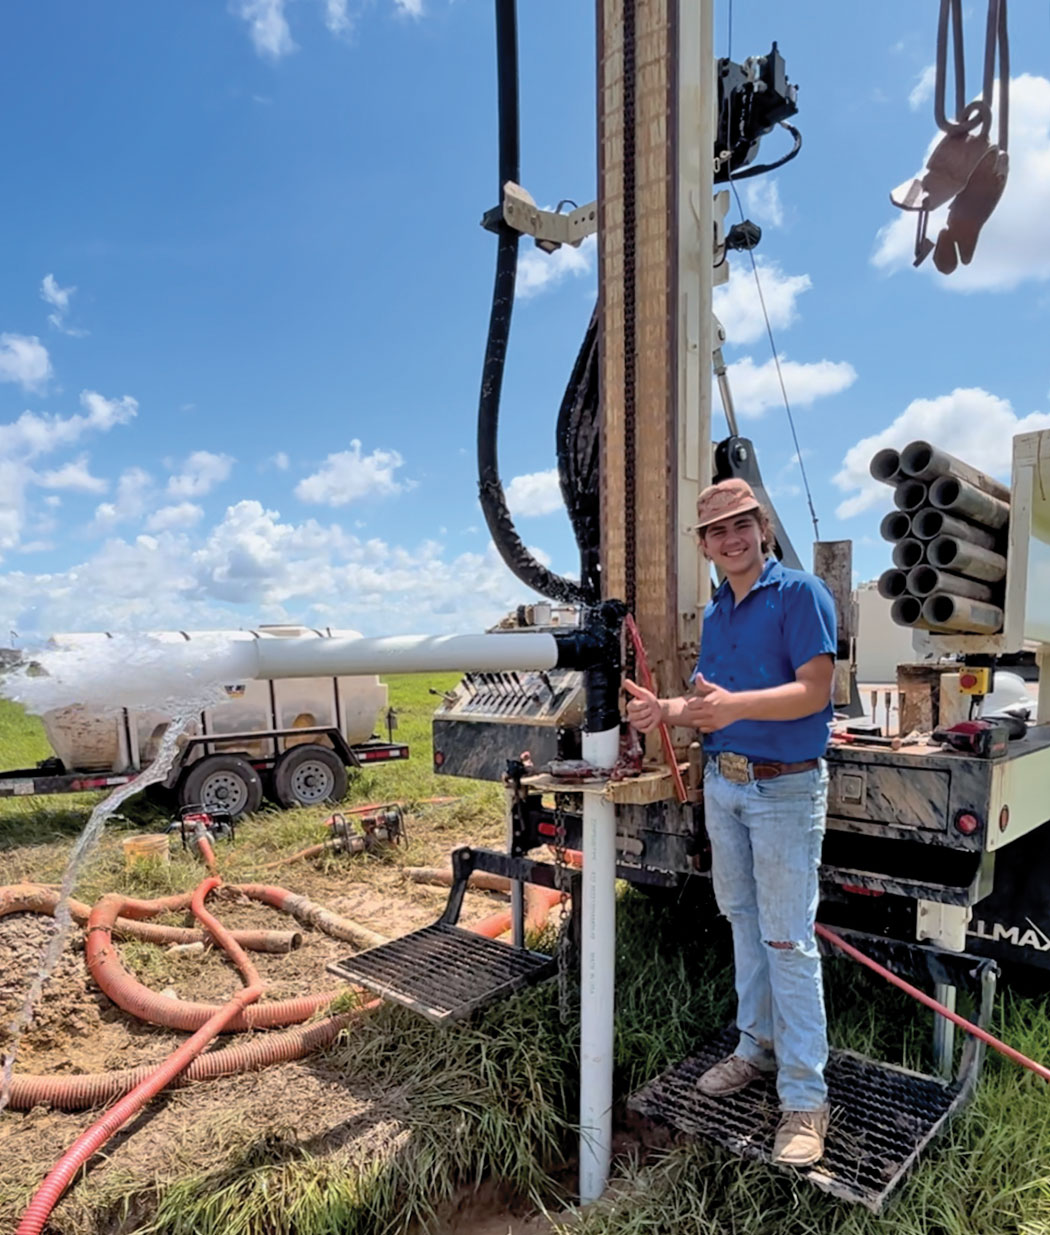 Fourth generation driller, 16-year-old Jack, learning to operate the "inherently safe" DM250 rig, which doesn't require a class A/B CDL.